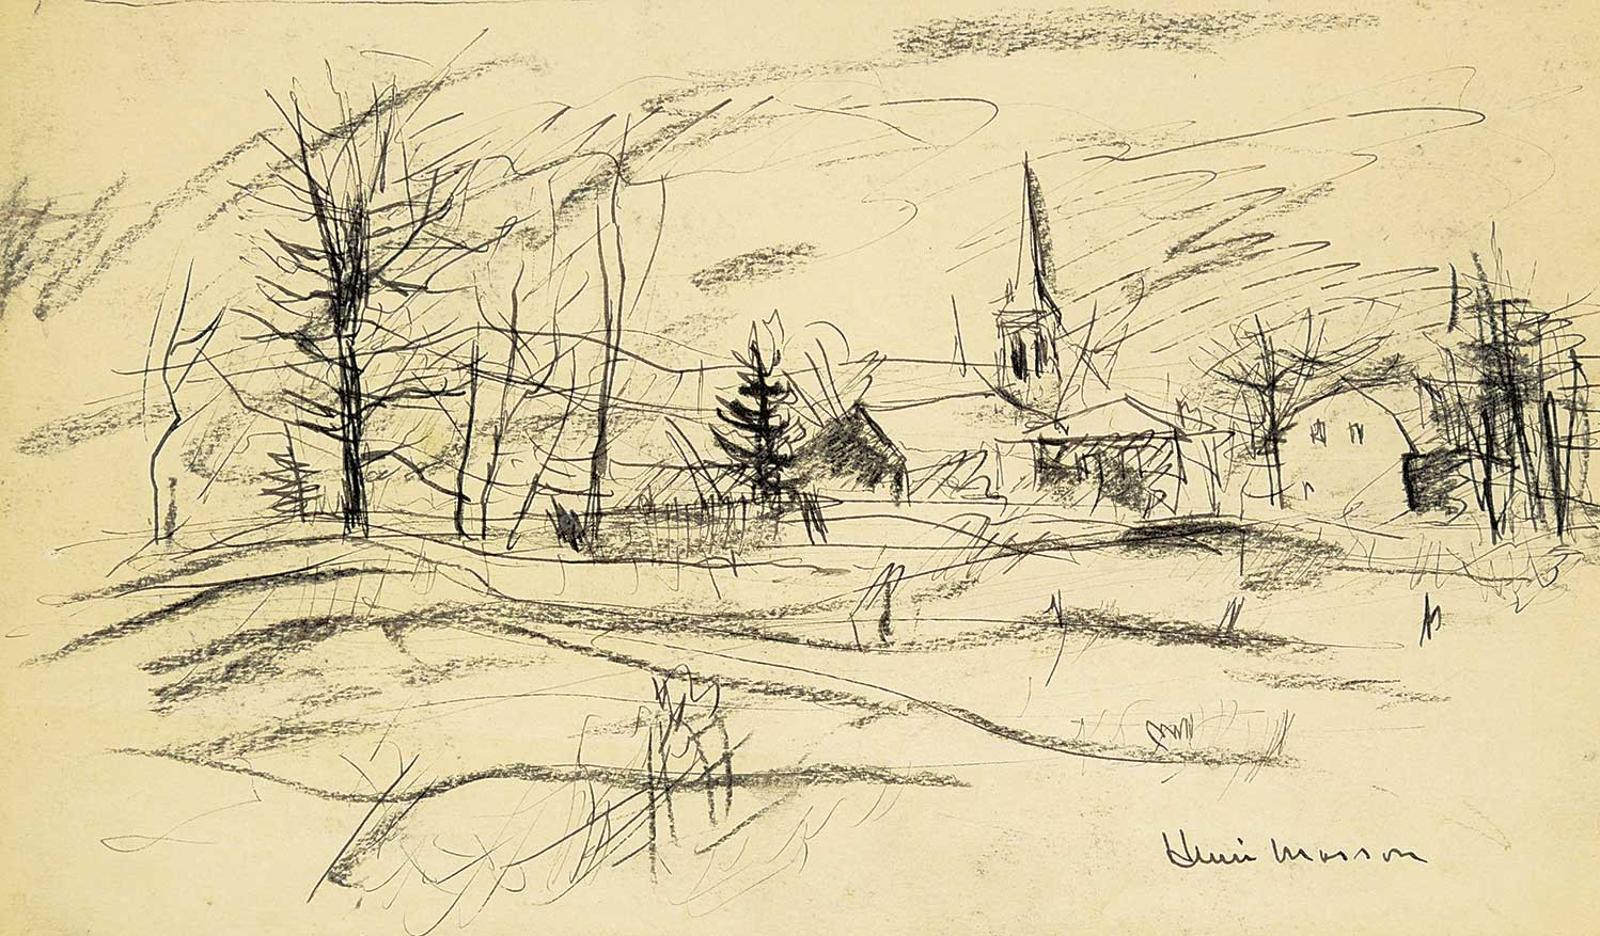 Henri Leopold Masson (1907-1996) - Untitled - Sketch of the Old Town